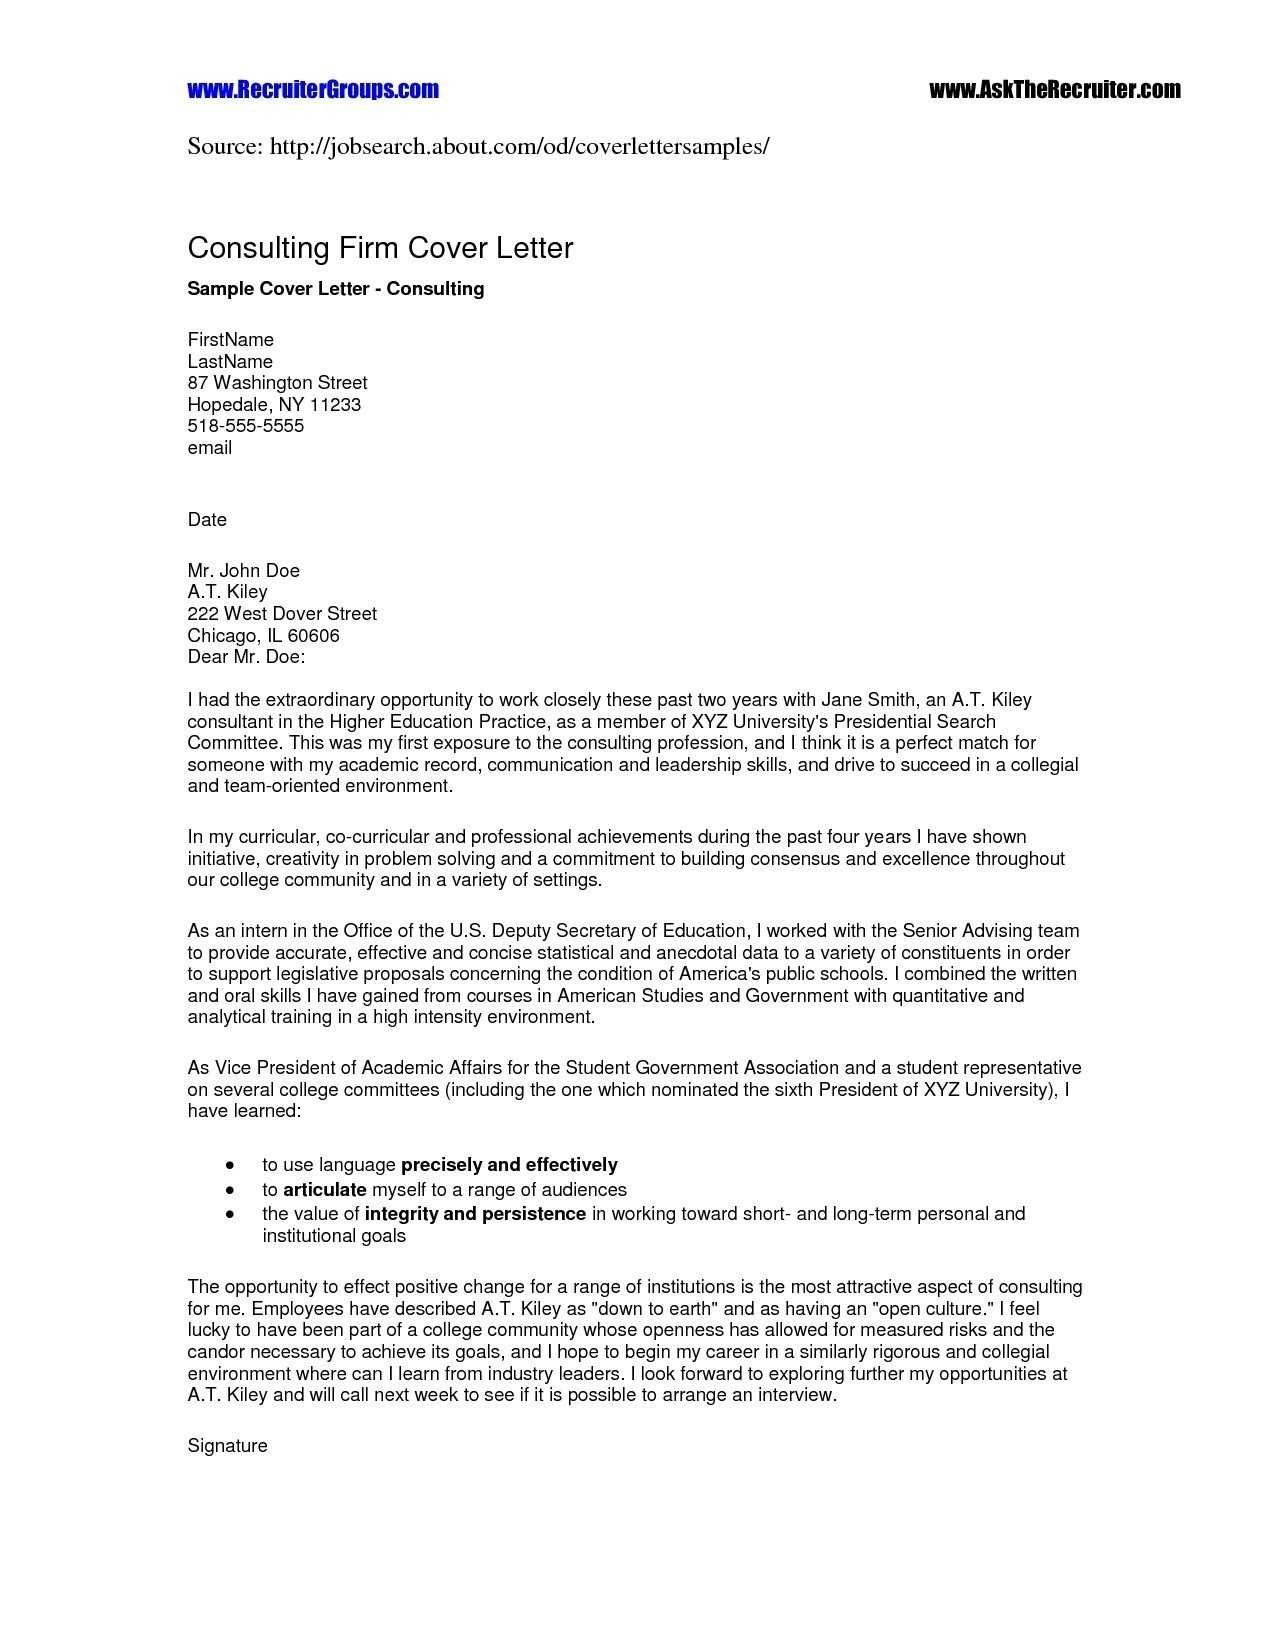 Criminal Record Disclosure Letter Template - Sample Background Check Report and Job Application Letter format